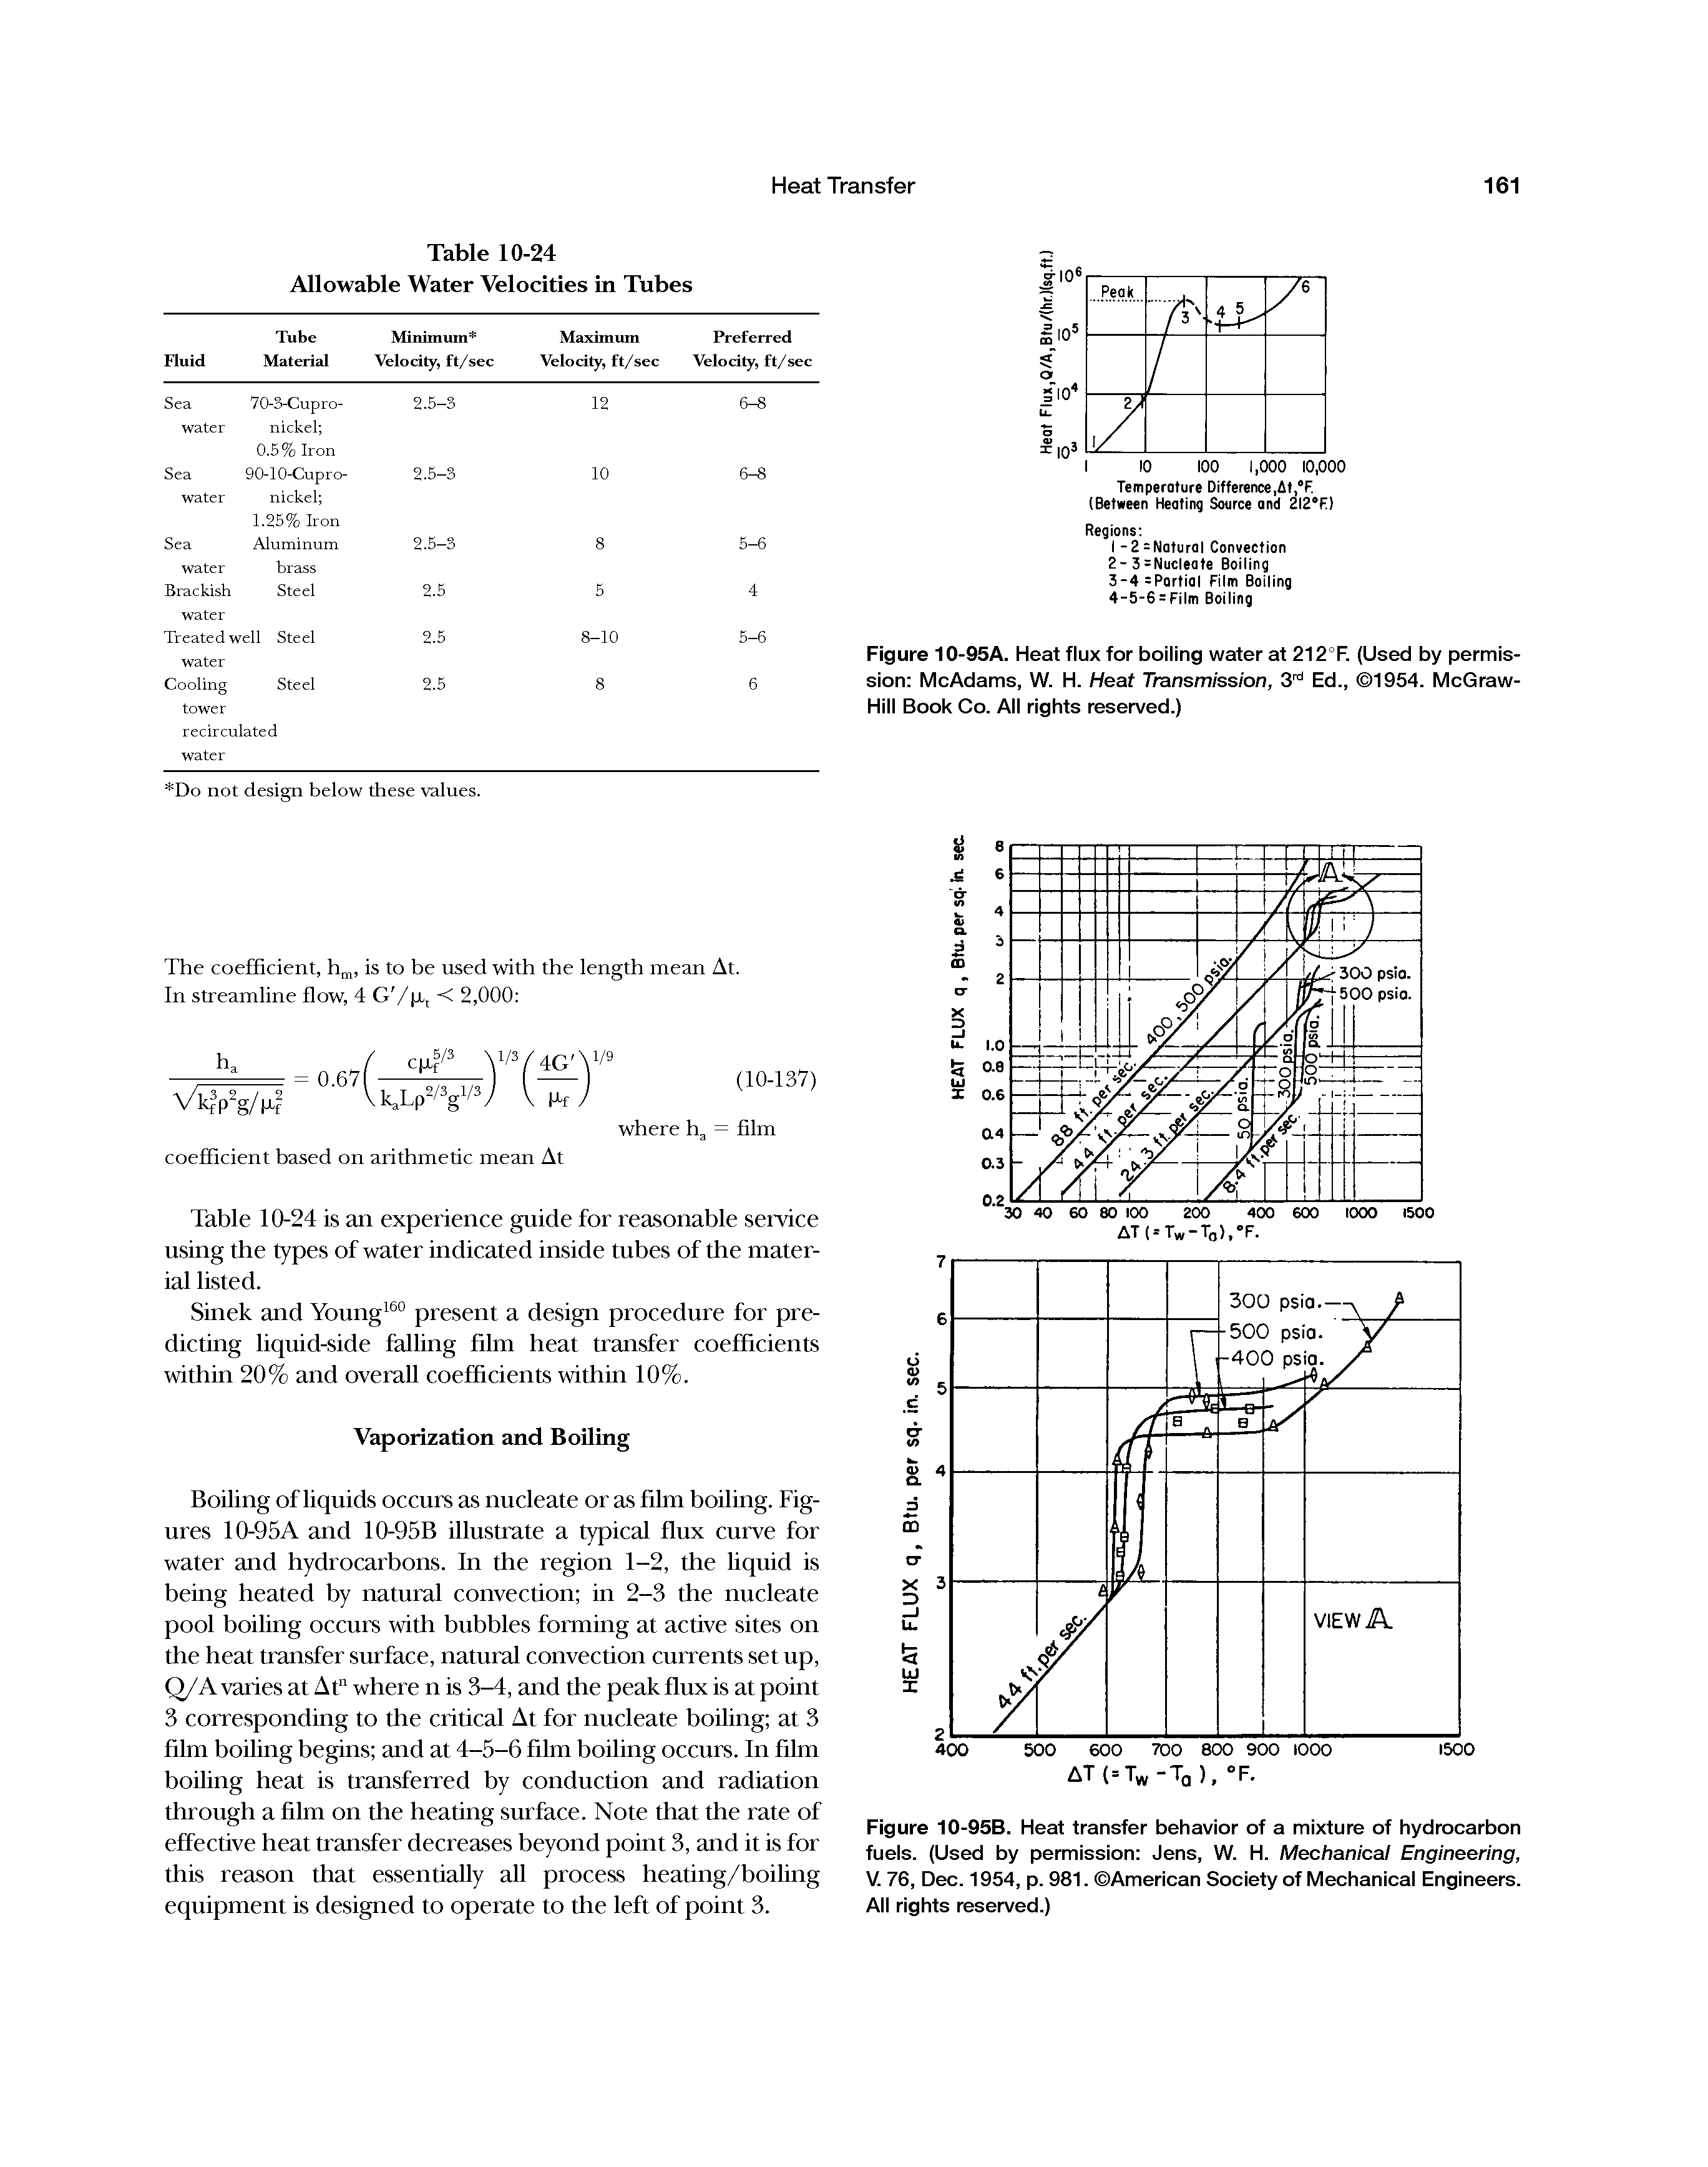 Figure 10-95B. Heat transfer behavior of a mixture of hydrocarbon fuels. (Used by permission Jens, W. H. Mechanical Engineering, V. 76, Dec. 1954, p. 981. American Society of Mechanical Engineers. All rights reserved.)...